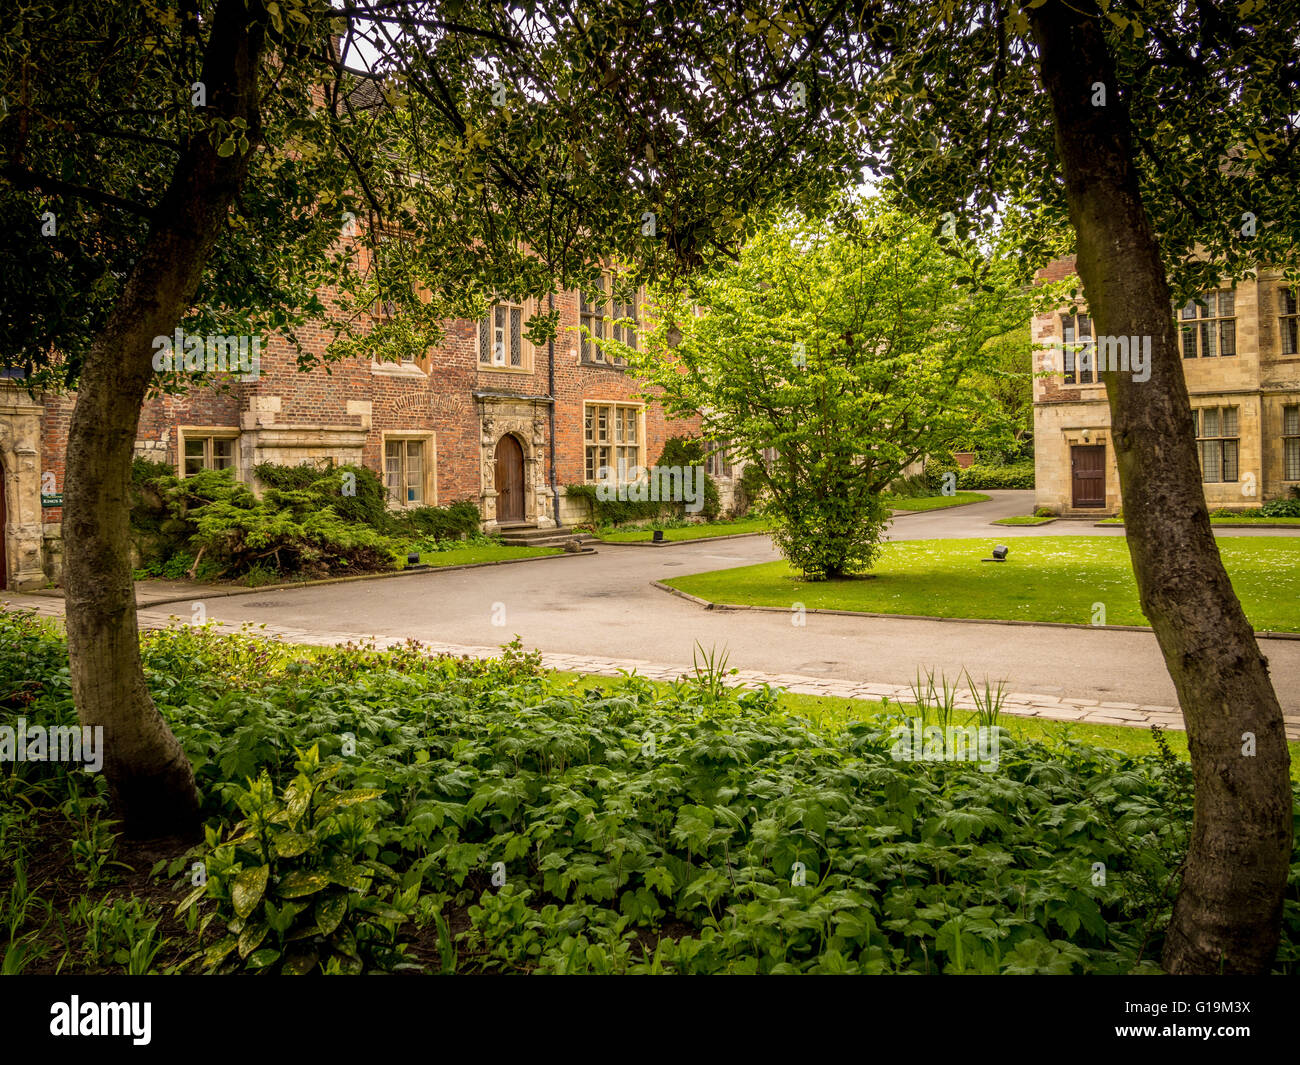 King's Manor, Grade I listed building in York, England. Part of the University of York. Stock Photo